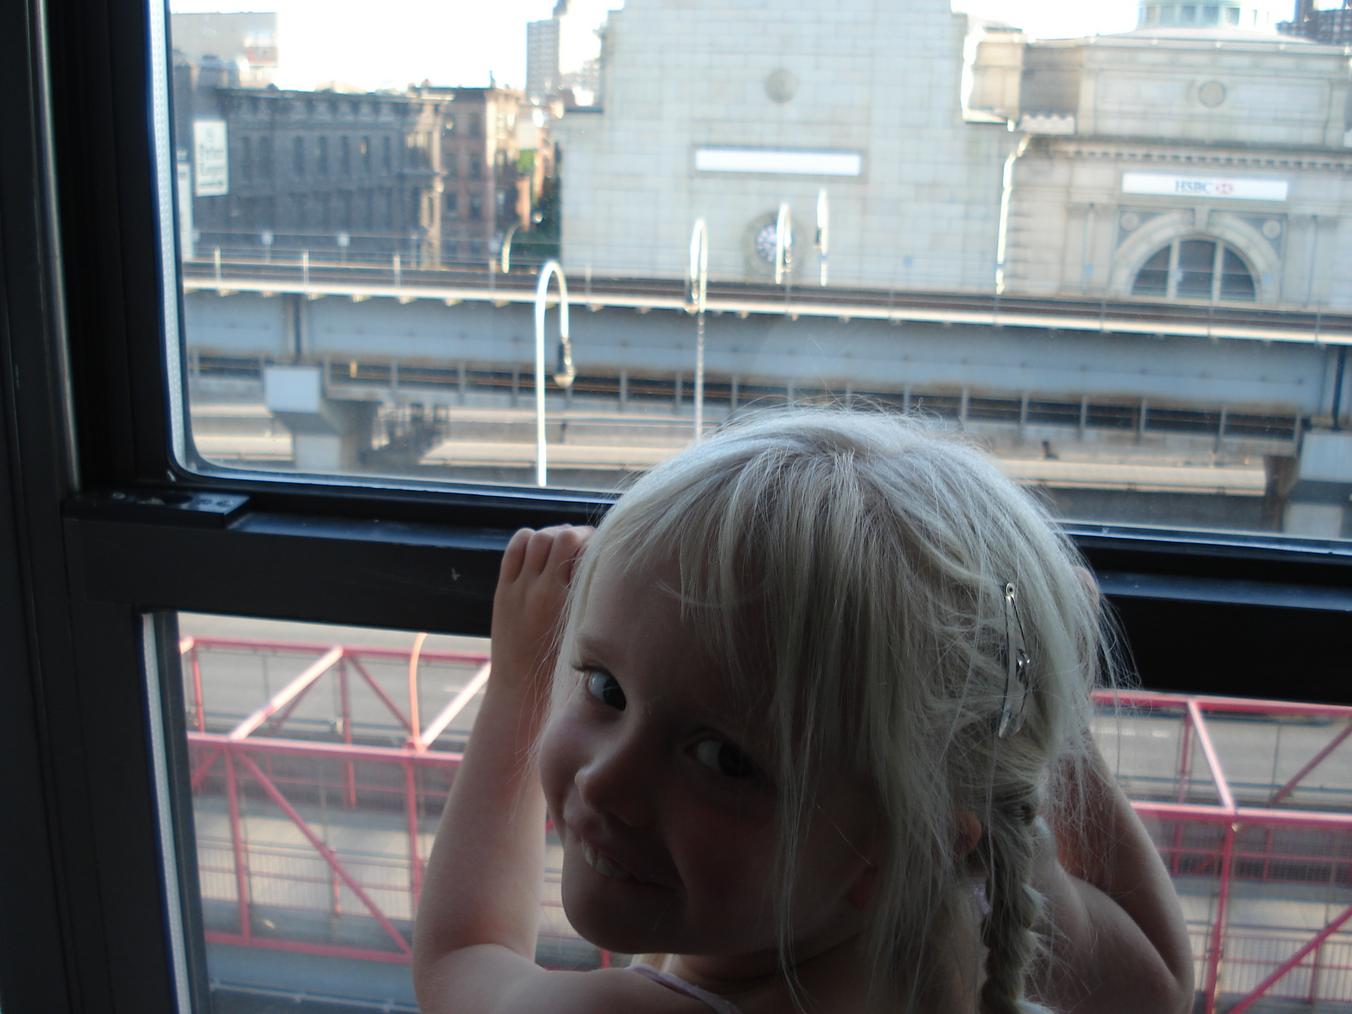 Marica looking out the window 4